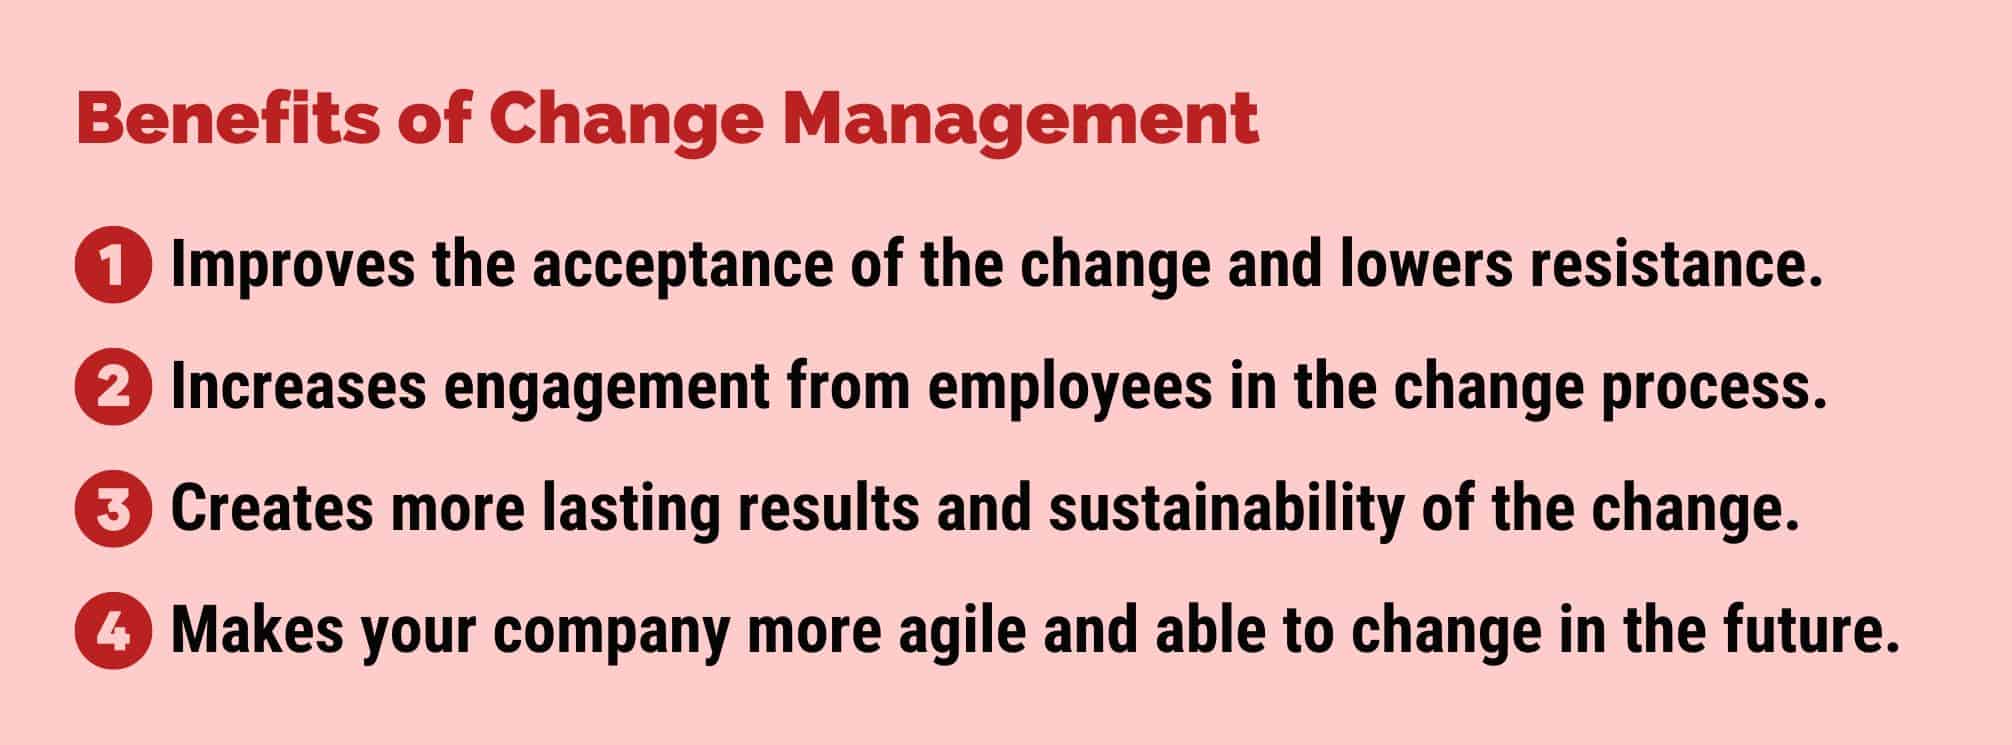 text-based graphic that says "benefits of change management" and lists the 4 benefits from the blog